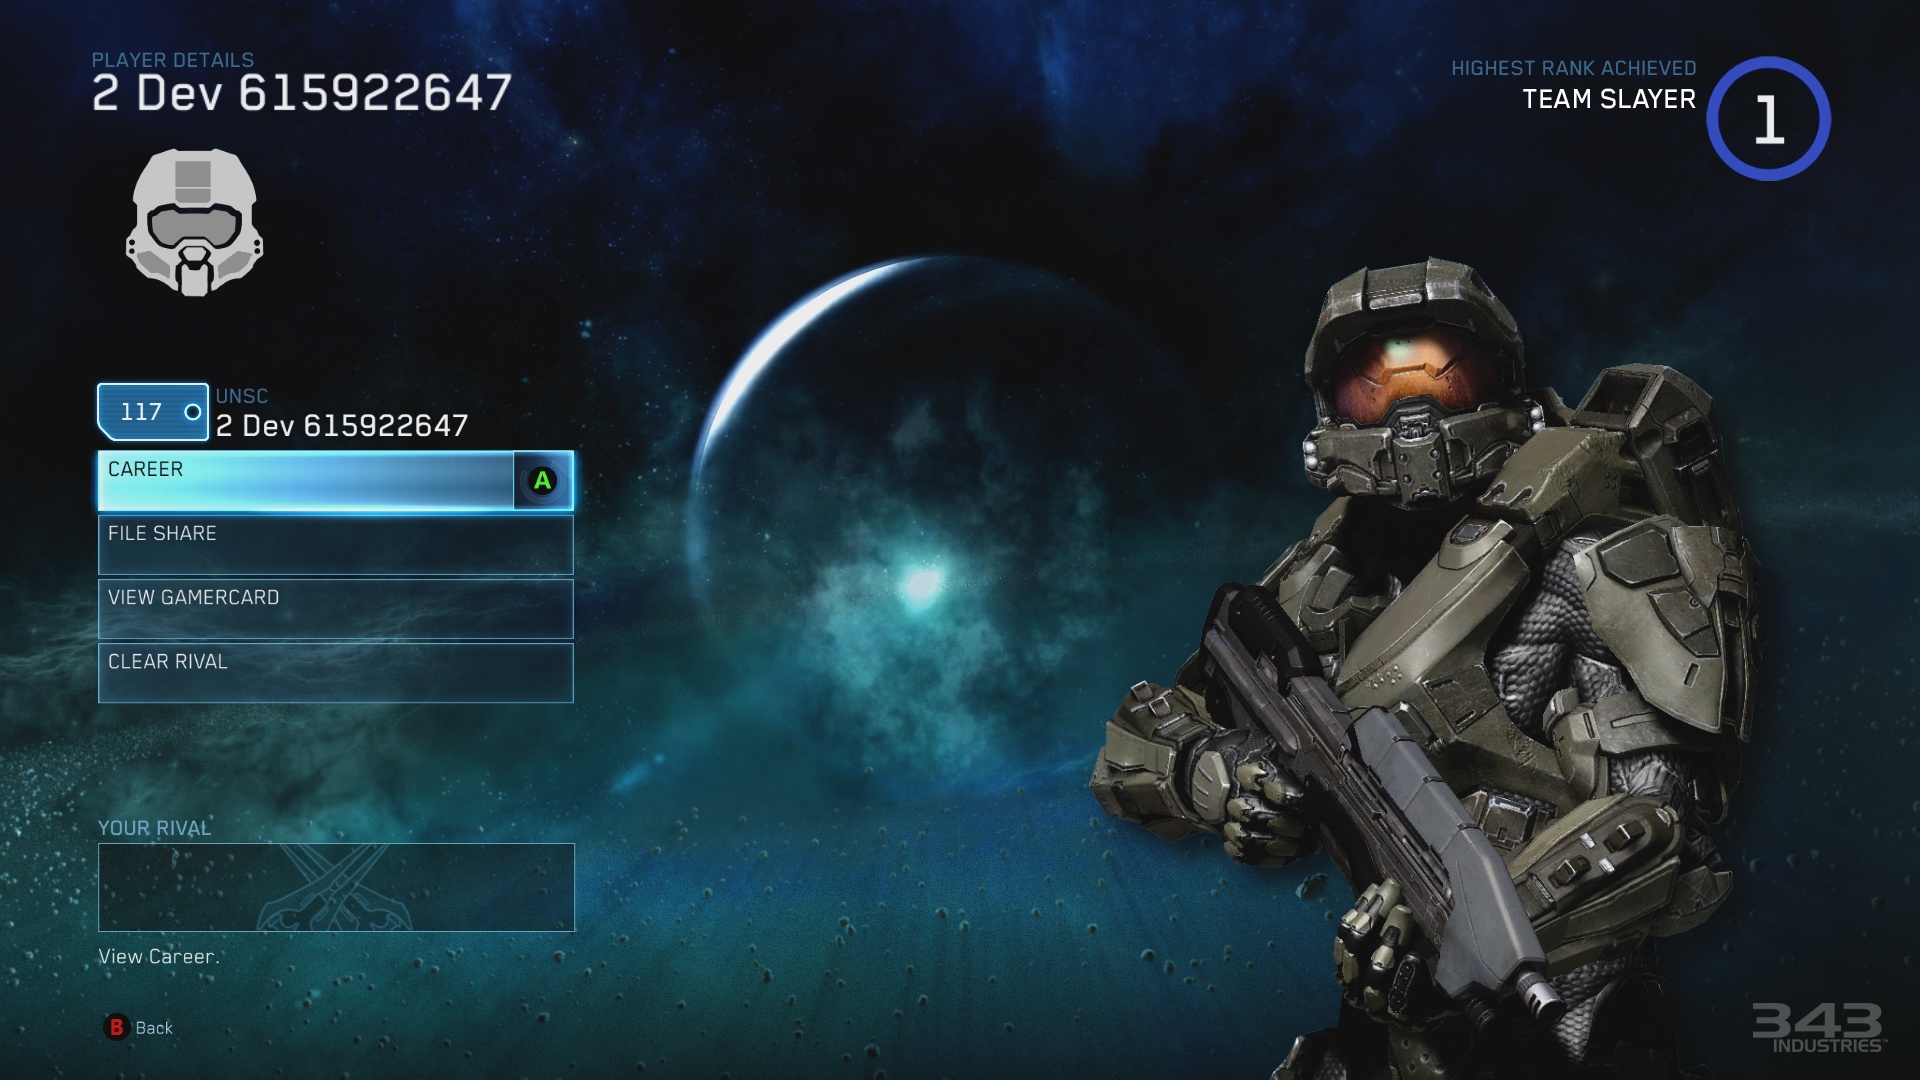 Halo the Master Chief collection геймплей. Halo Master Chief collection Gameplay. Halo мастер Чиф рост. Halo Ranks UNSC.